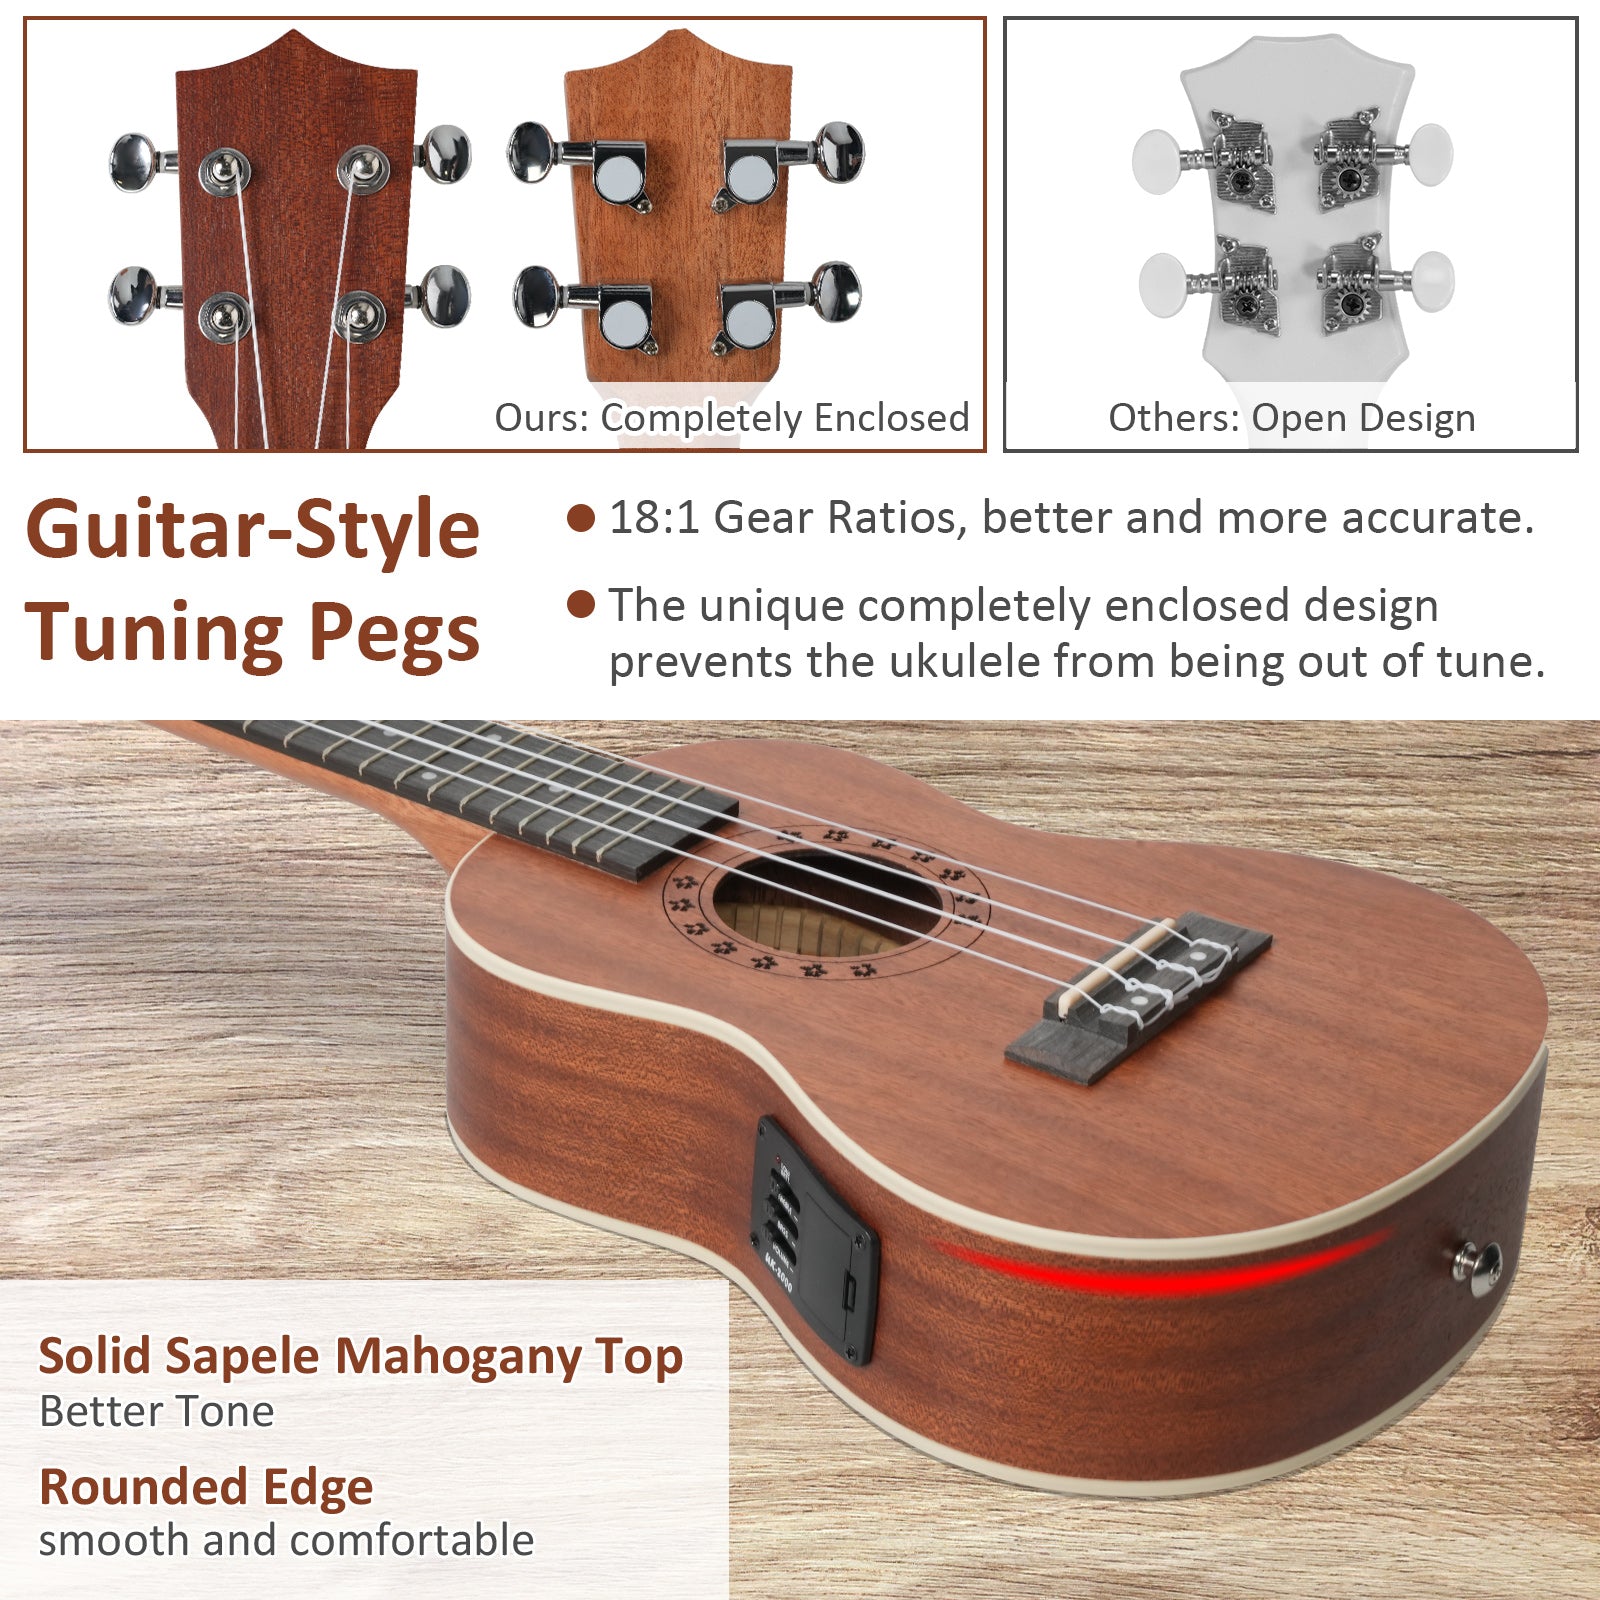 (Out of Stock) 23-inch Mahogany Wood Ukulele, Wooden Electric Ukulele Starter for Adult Practice or Performance, with Tuner Tape and Full Accessories